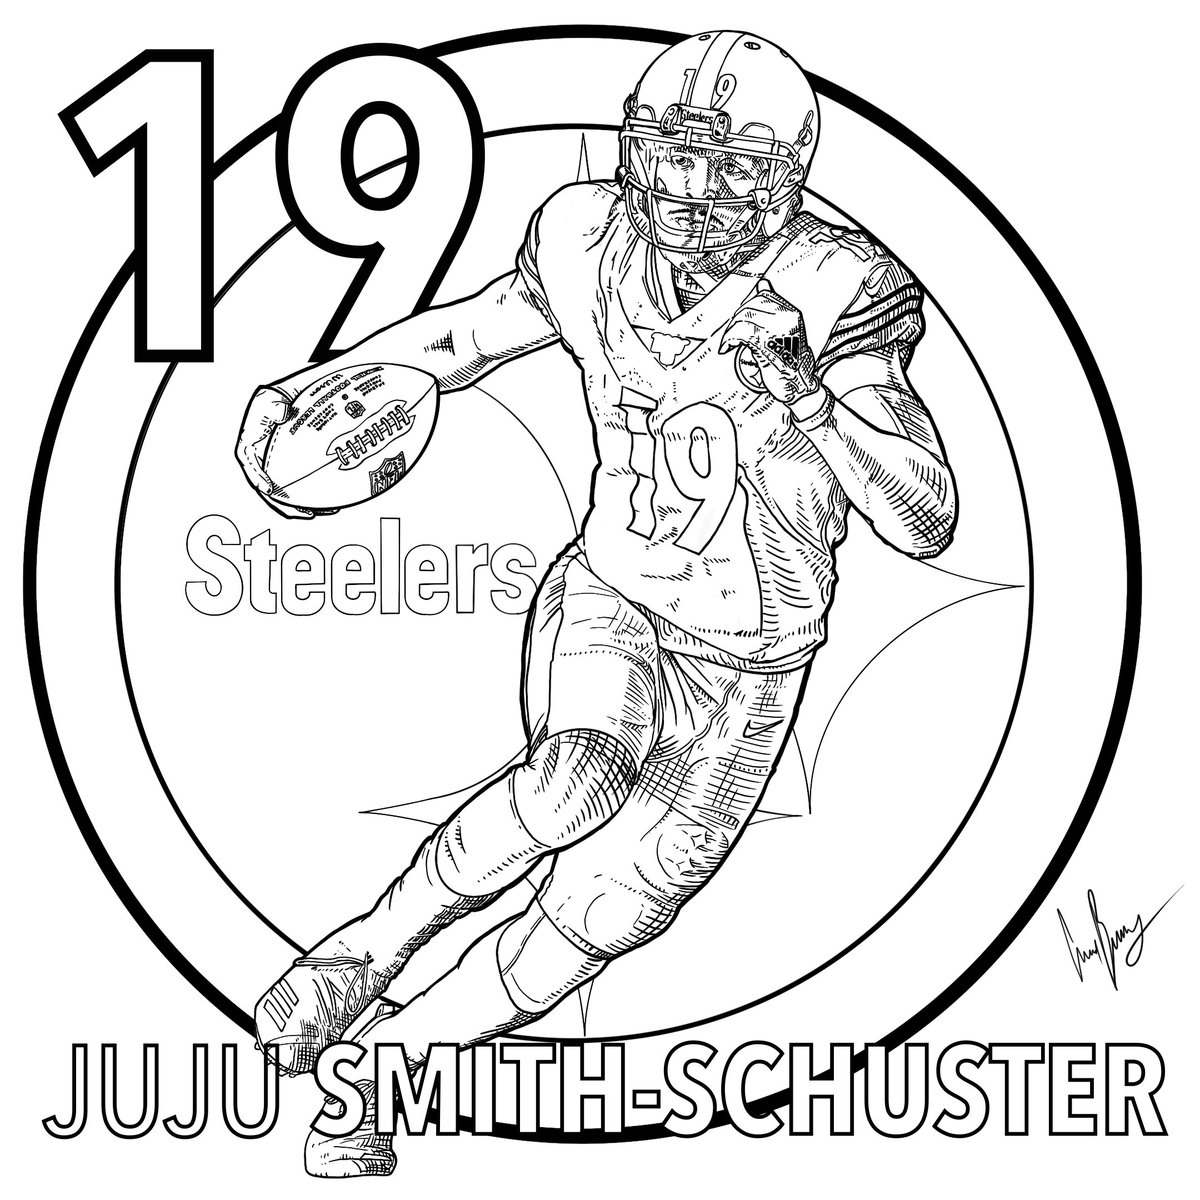 Pittsburgh steelers on x its nationalcrayonday seems like a perfect day to give steelersnation some coloring pages ð ïâ print ïâ color ïâ tweet us your pleted coloring page download steelers coloring